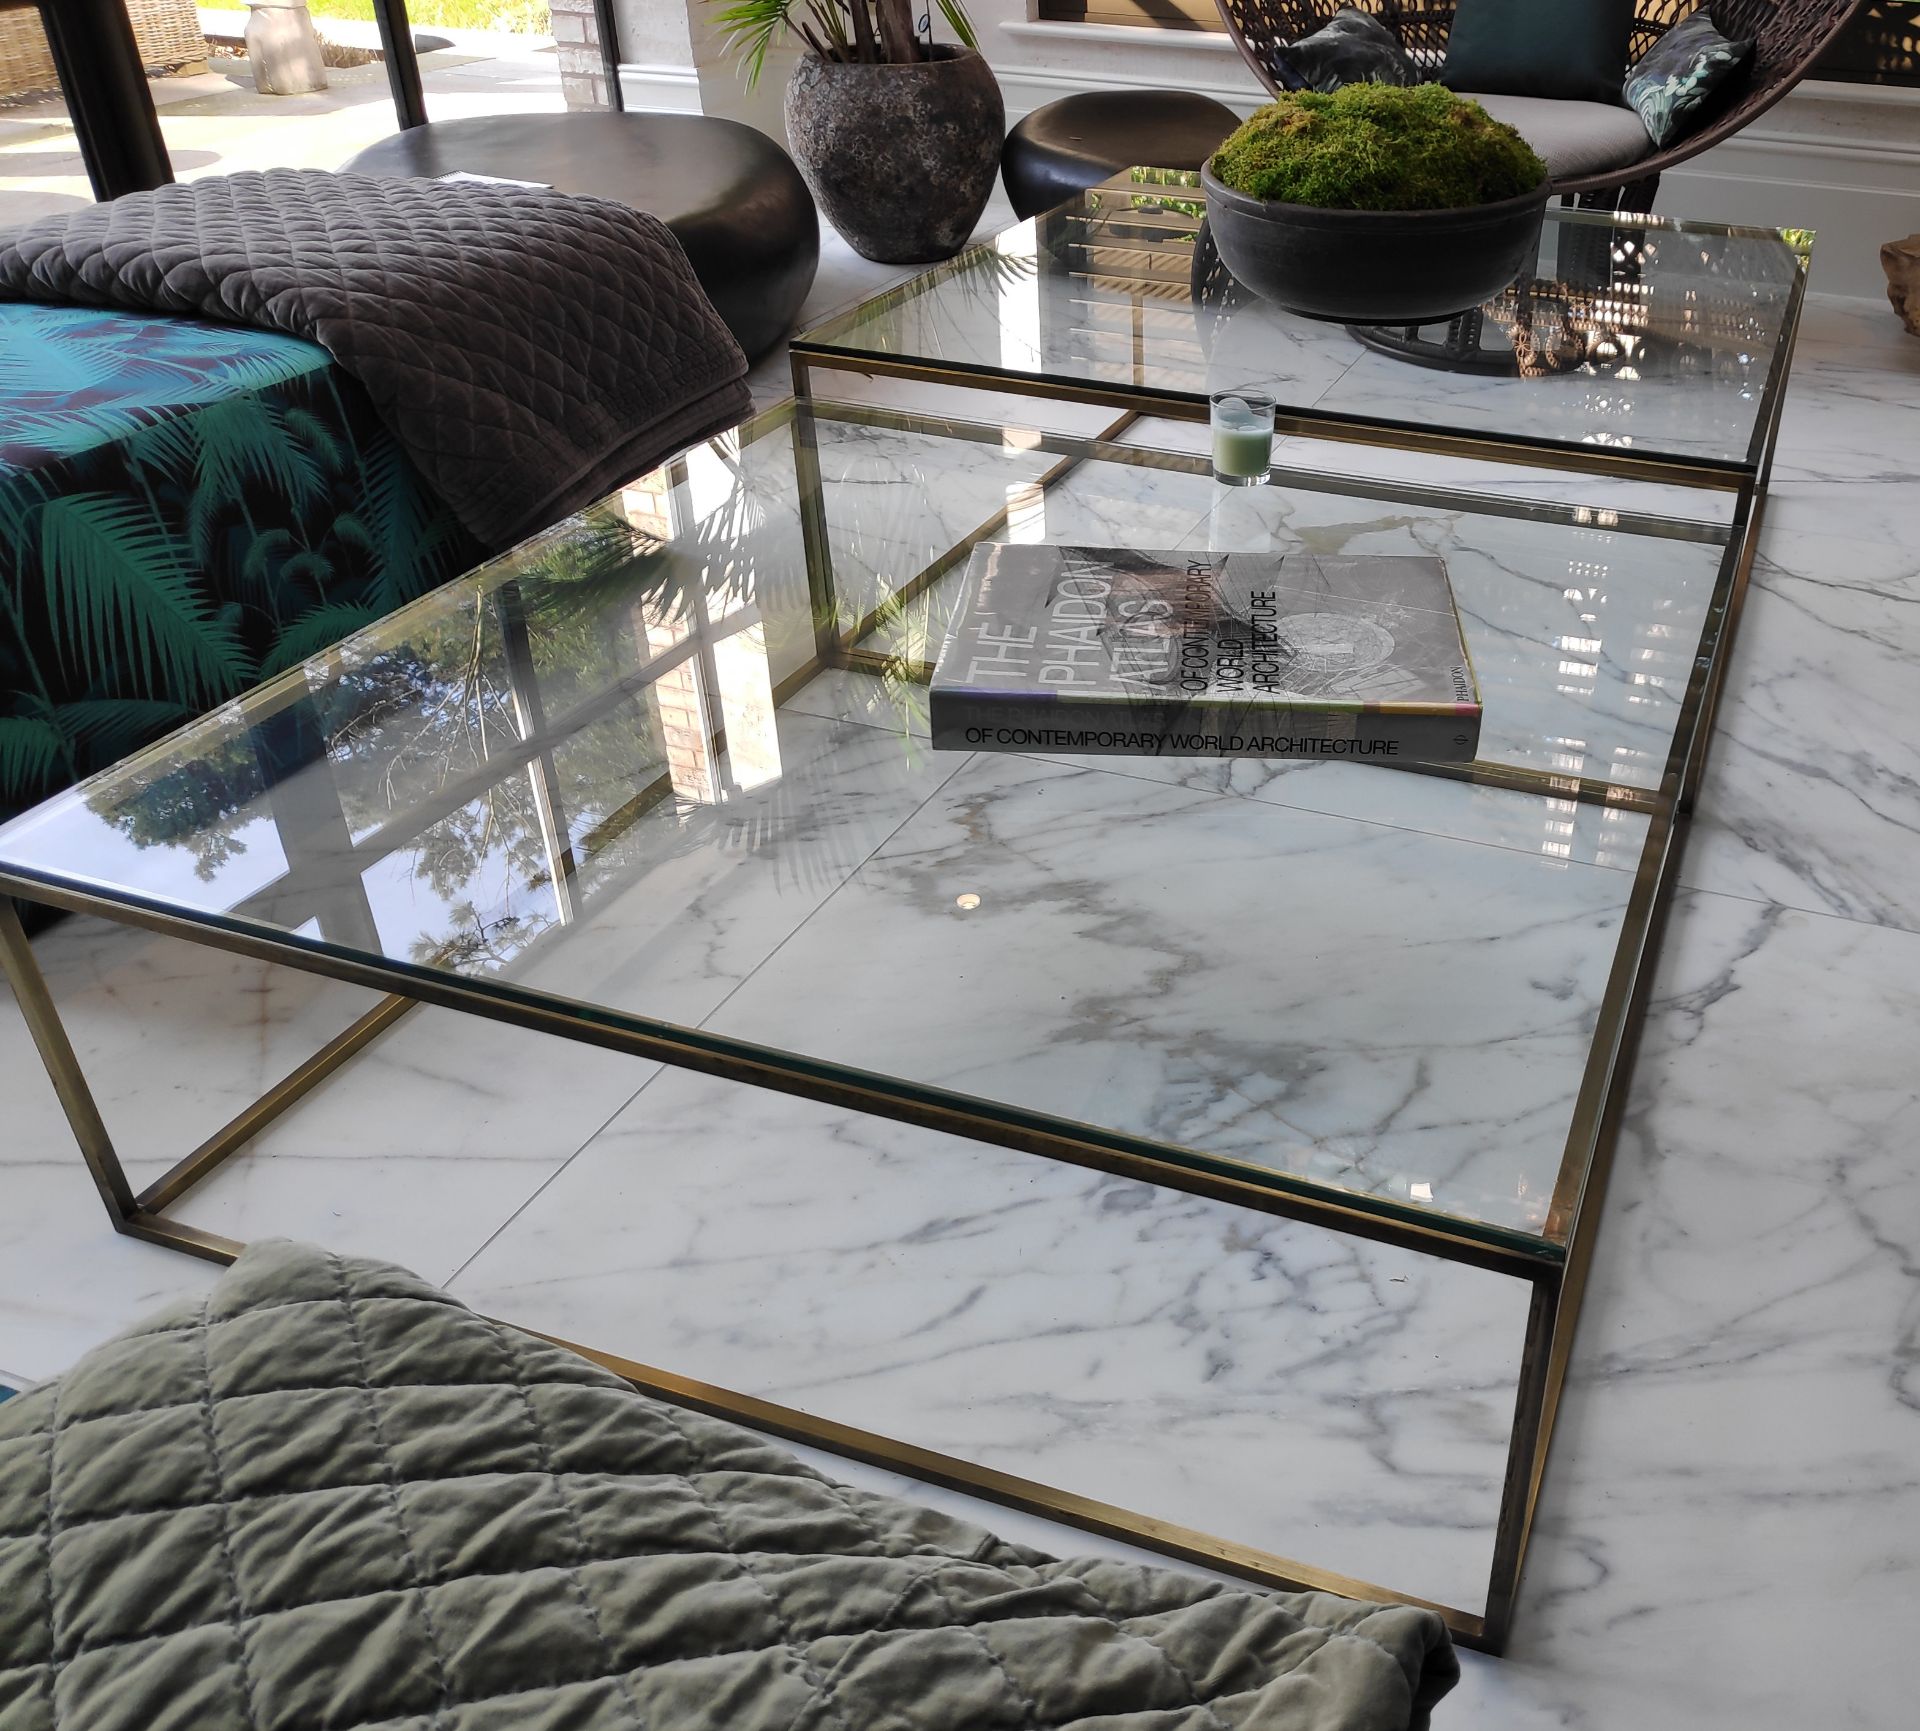 1 x Large 2-Tier Glass Coffee Table with Metal Frame - Dimensions: W240 x D120 x H45.5 cm - - Image 13 of 14